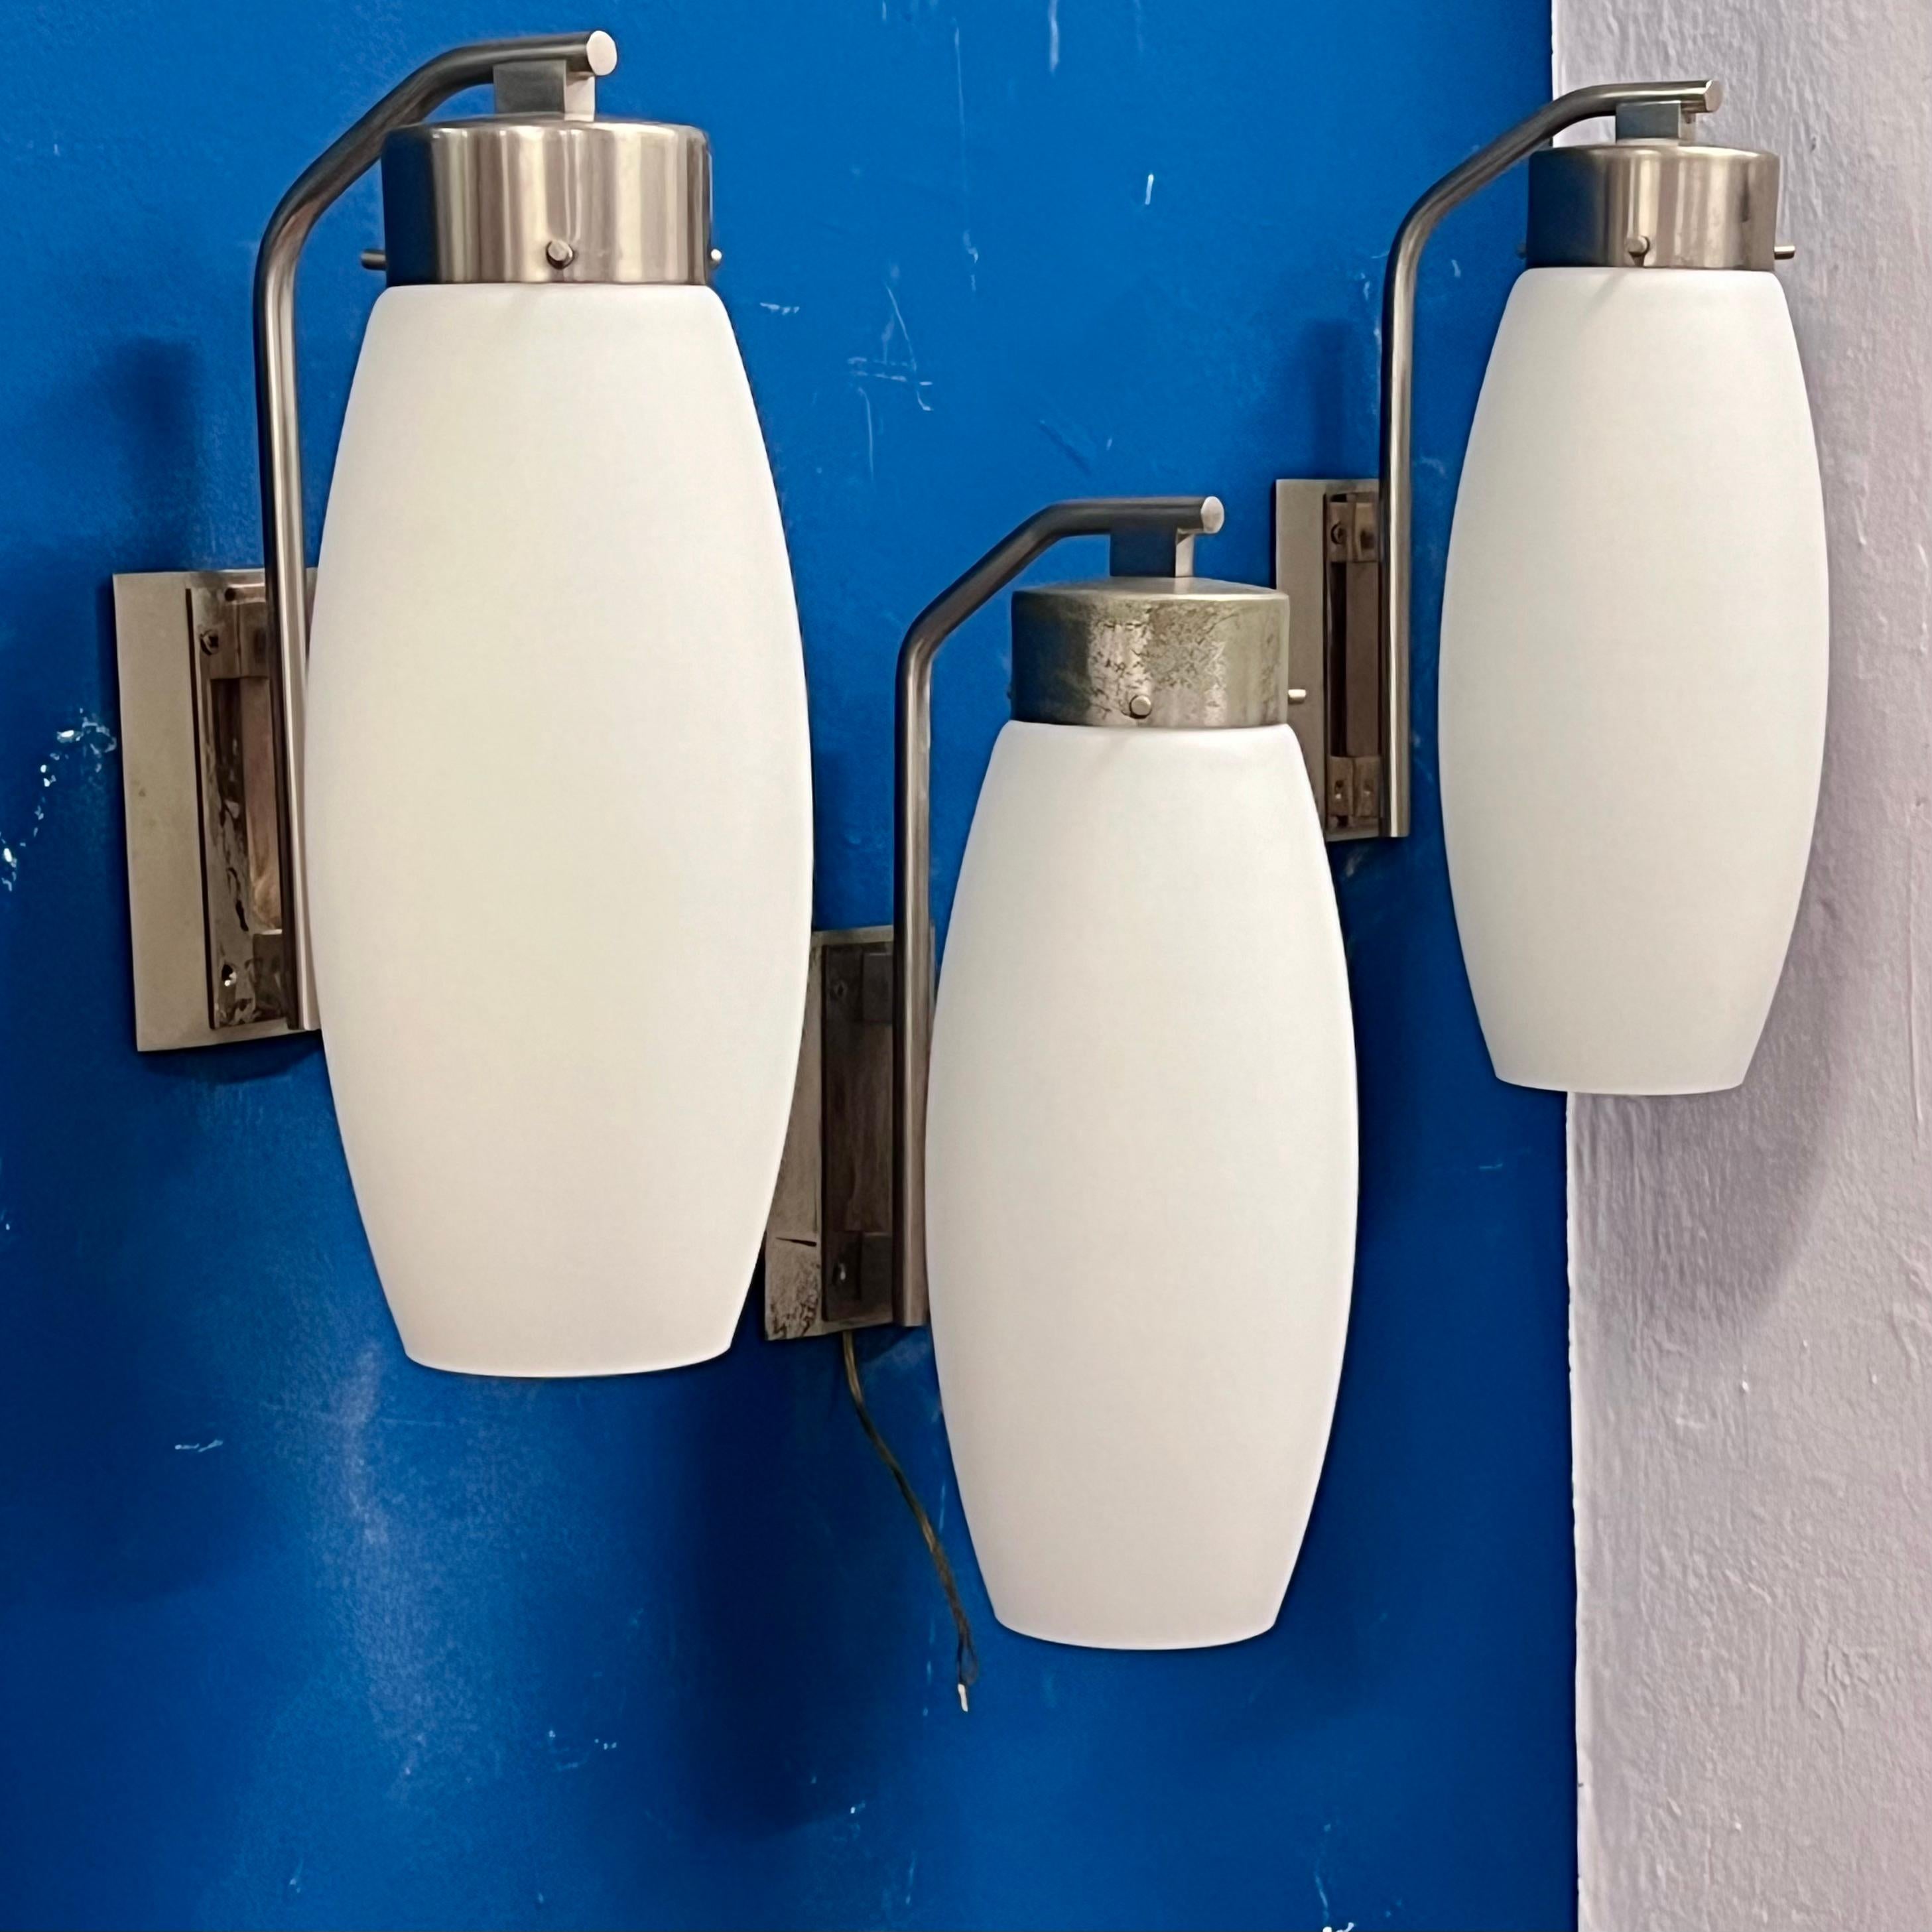 There are three of them, they are big and they are perfect. Purchasable separately.
A series of three Stilnovo-branded wall sconces, branded recessed into the plates of the wall brackets.
Made of nickel-plated brass and frosted glass. A large